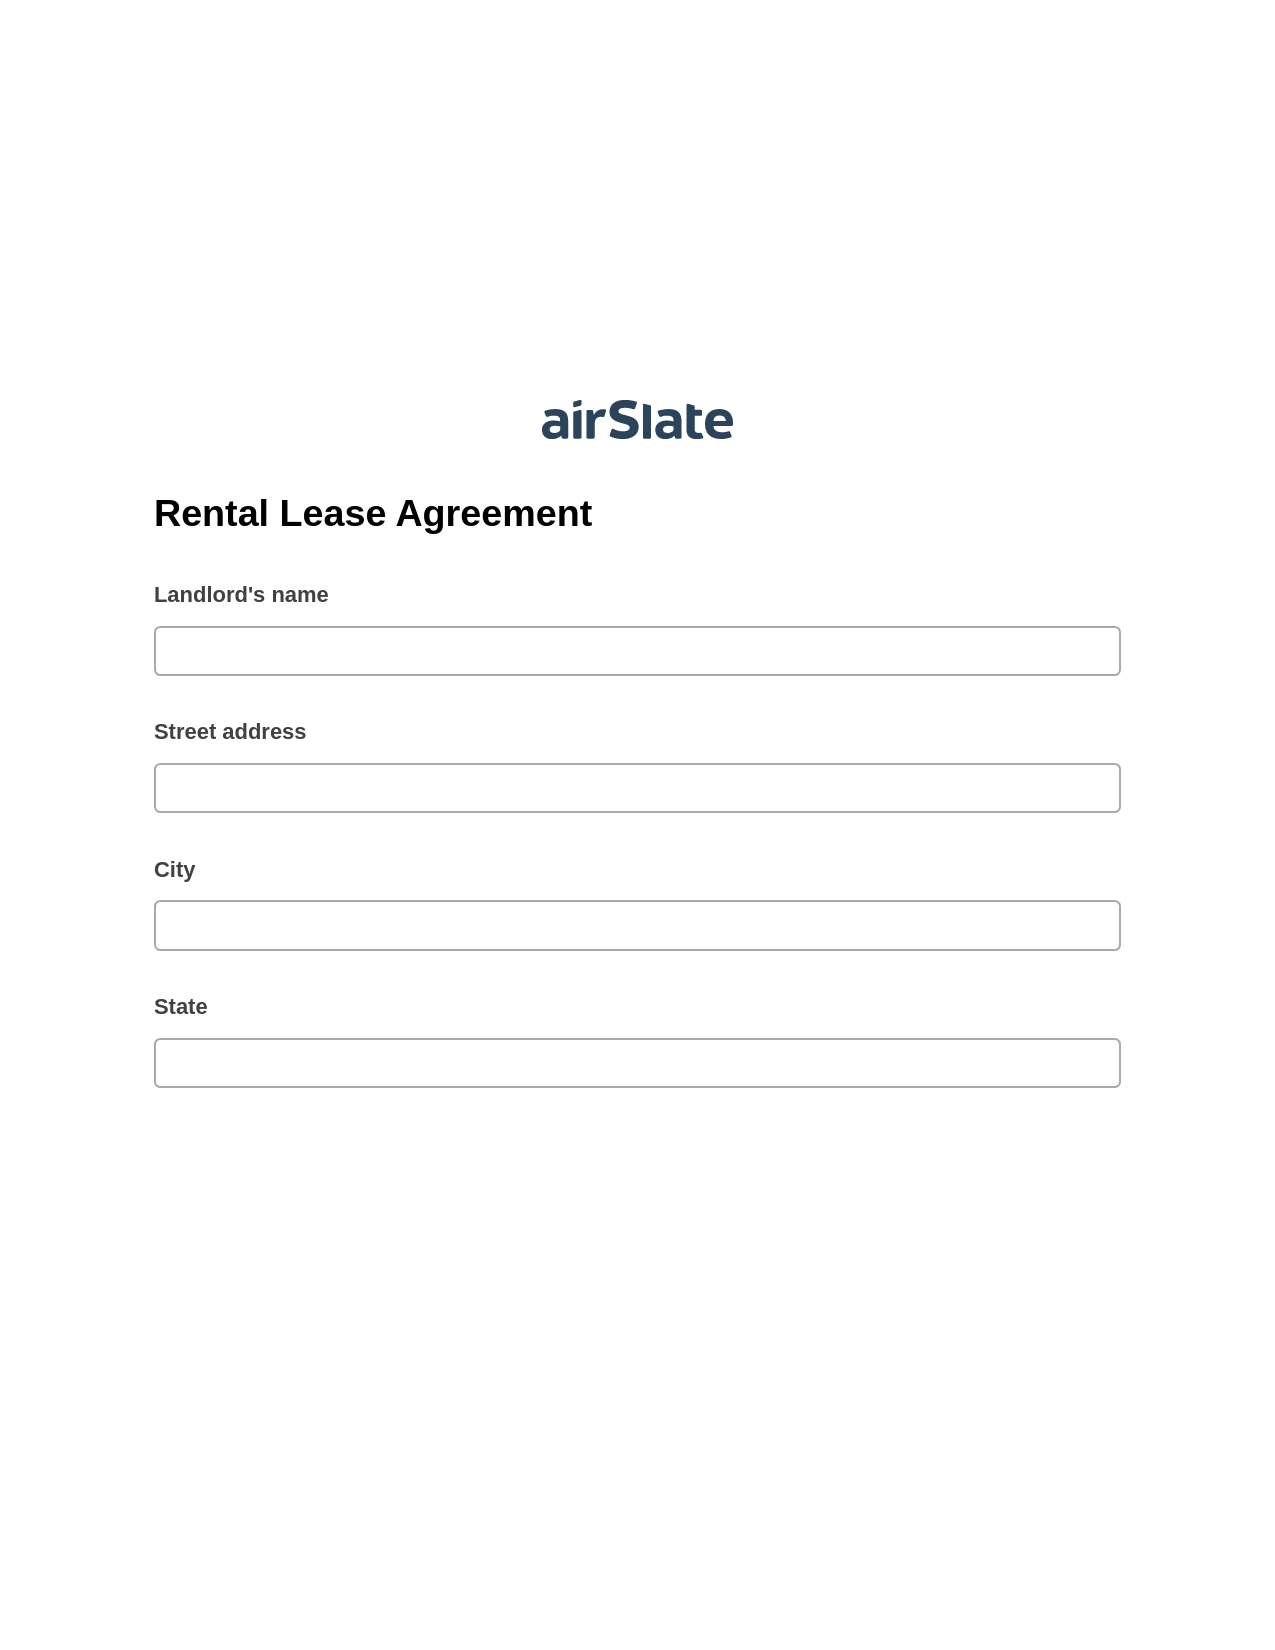 Rental Lease Agreement Pre-fill Dropdown from Airtable, Document Hide Bot, Export to NetSuite Record Bot